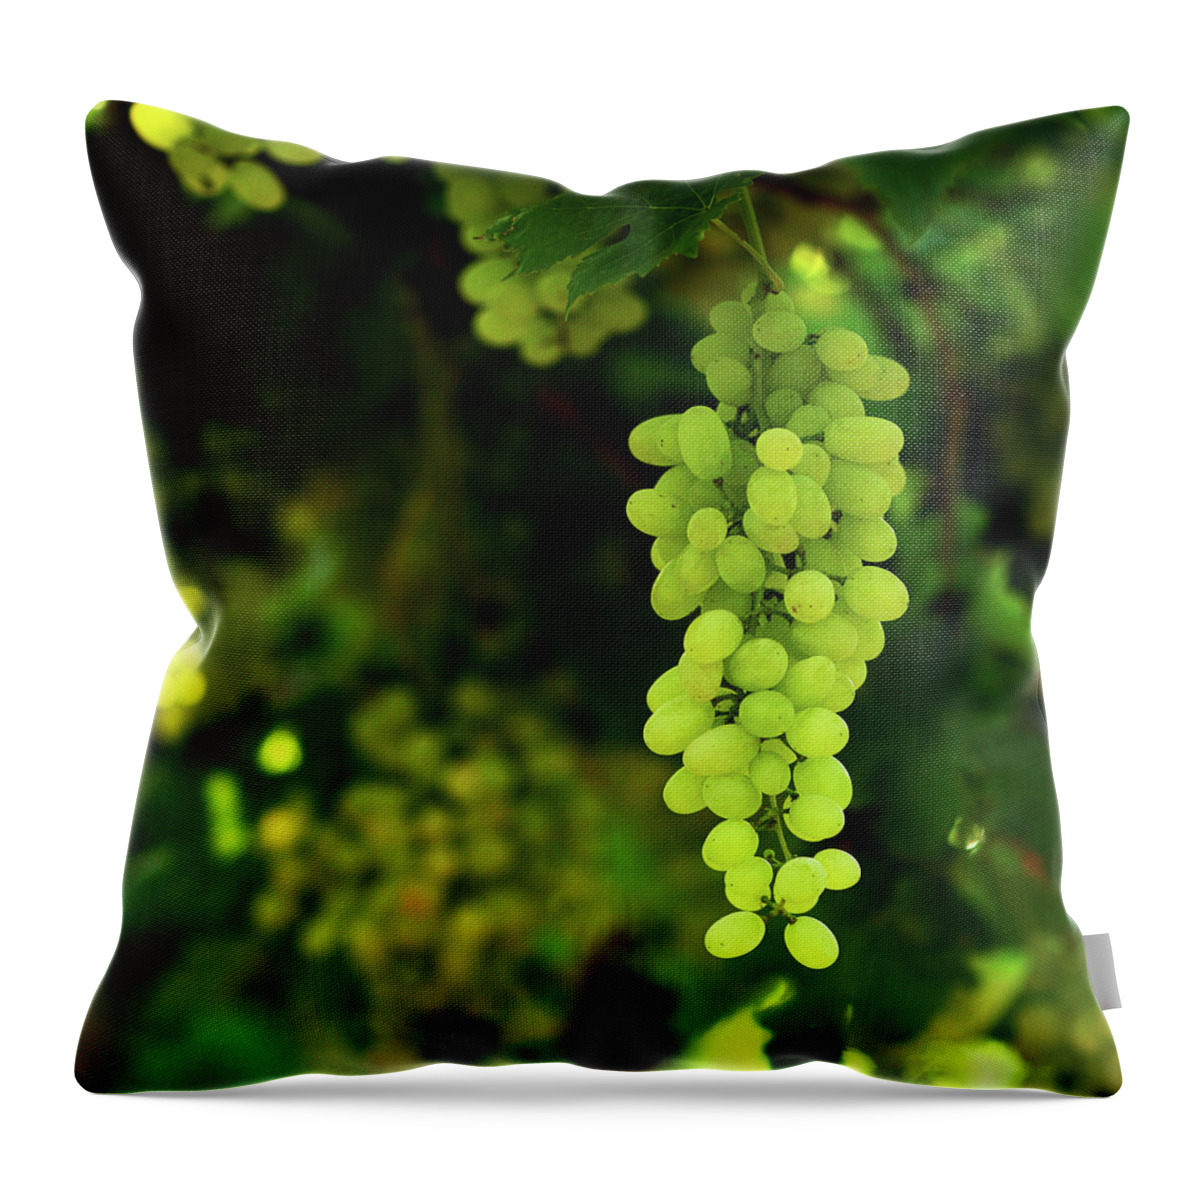 Andhra Pradesh Throw Pillow featuring the photograph Vineyard Green Grapes by Ashasathees Photography